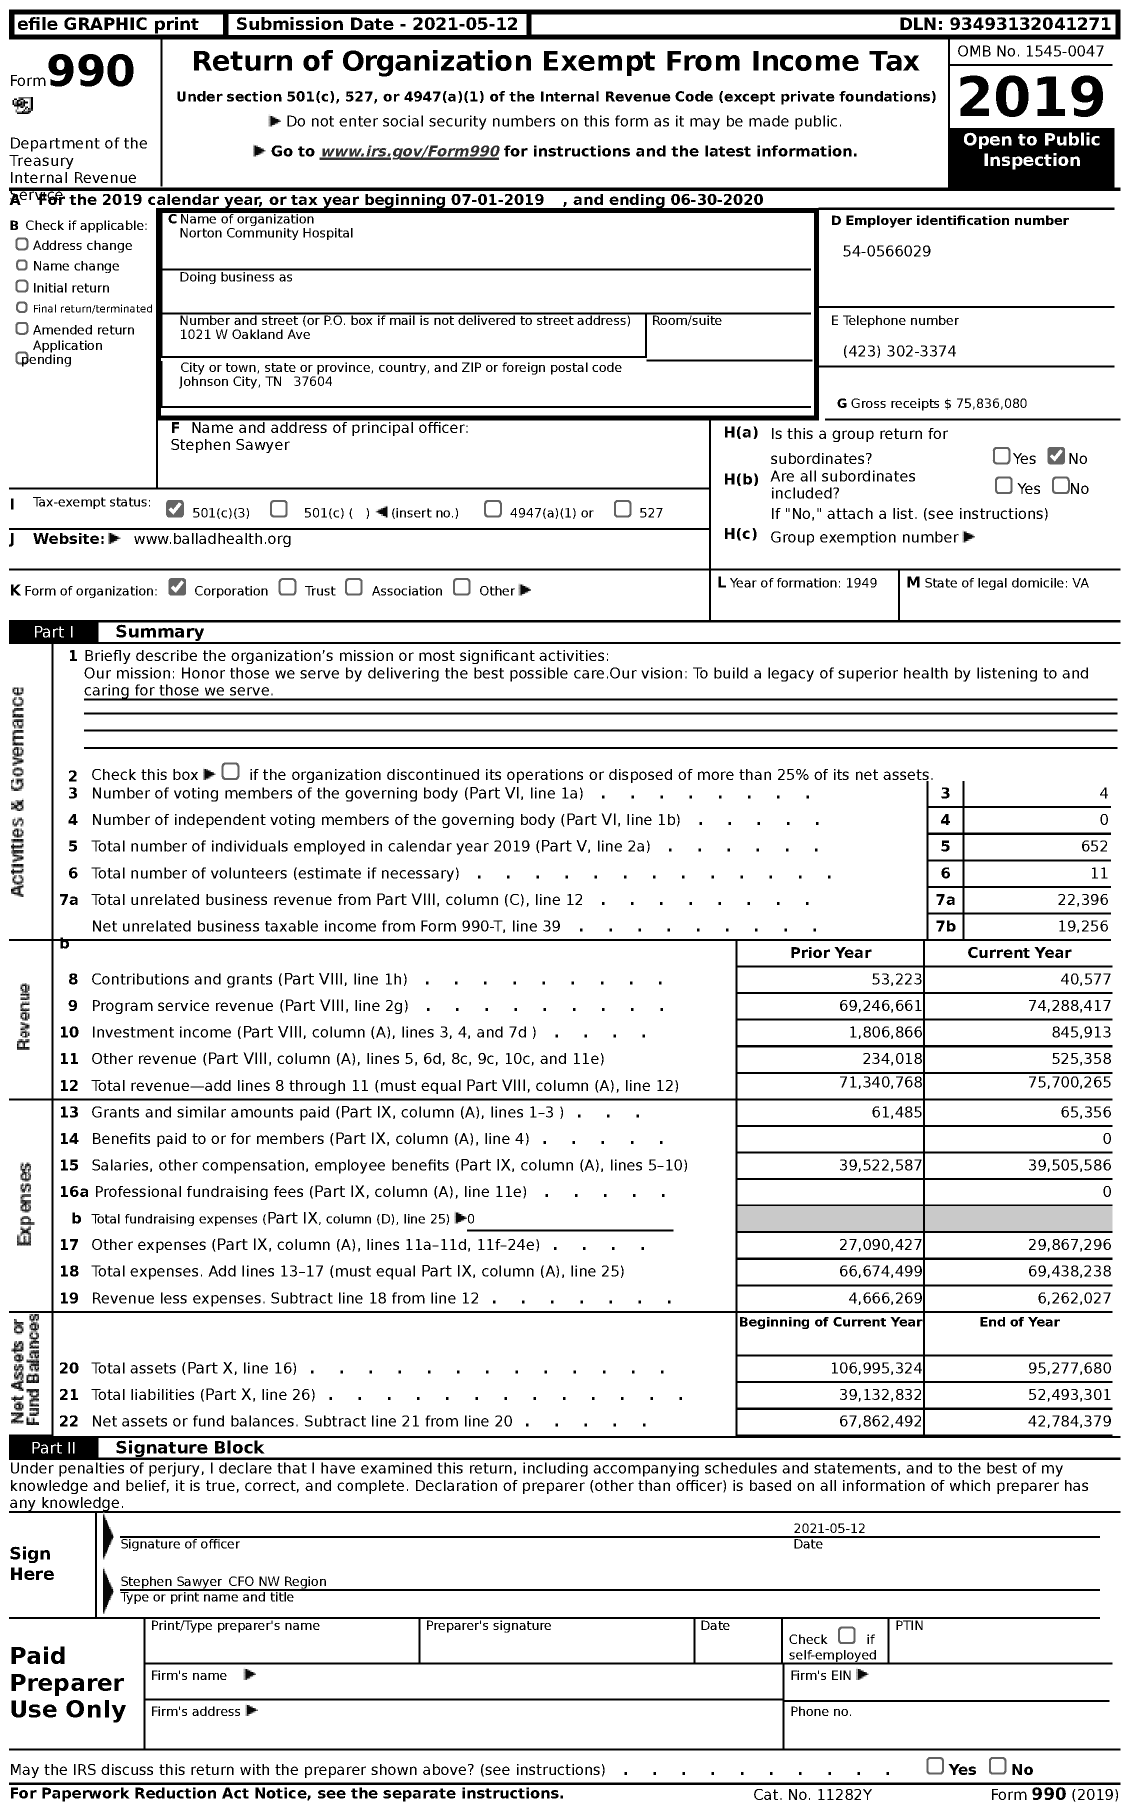 Image of first page of 2019 Form 990 for Norton Community Hospital (NCH)